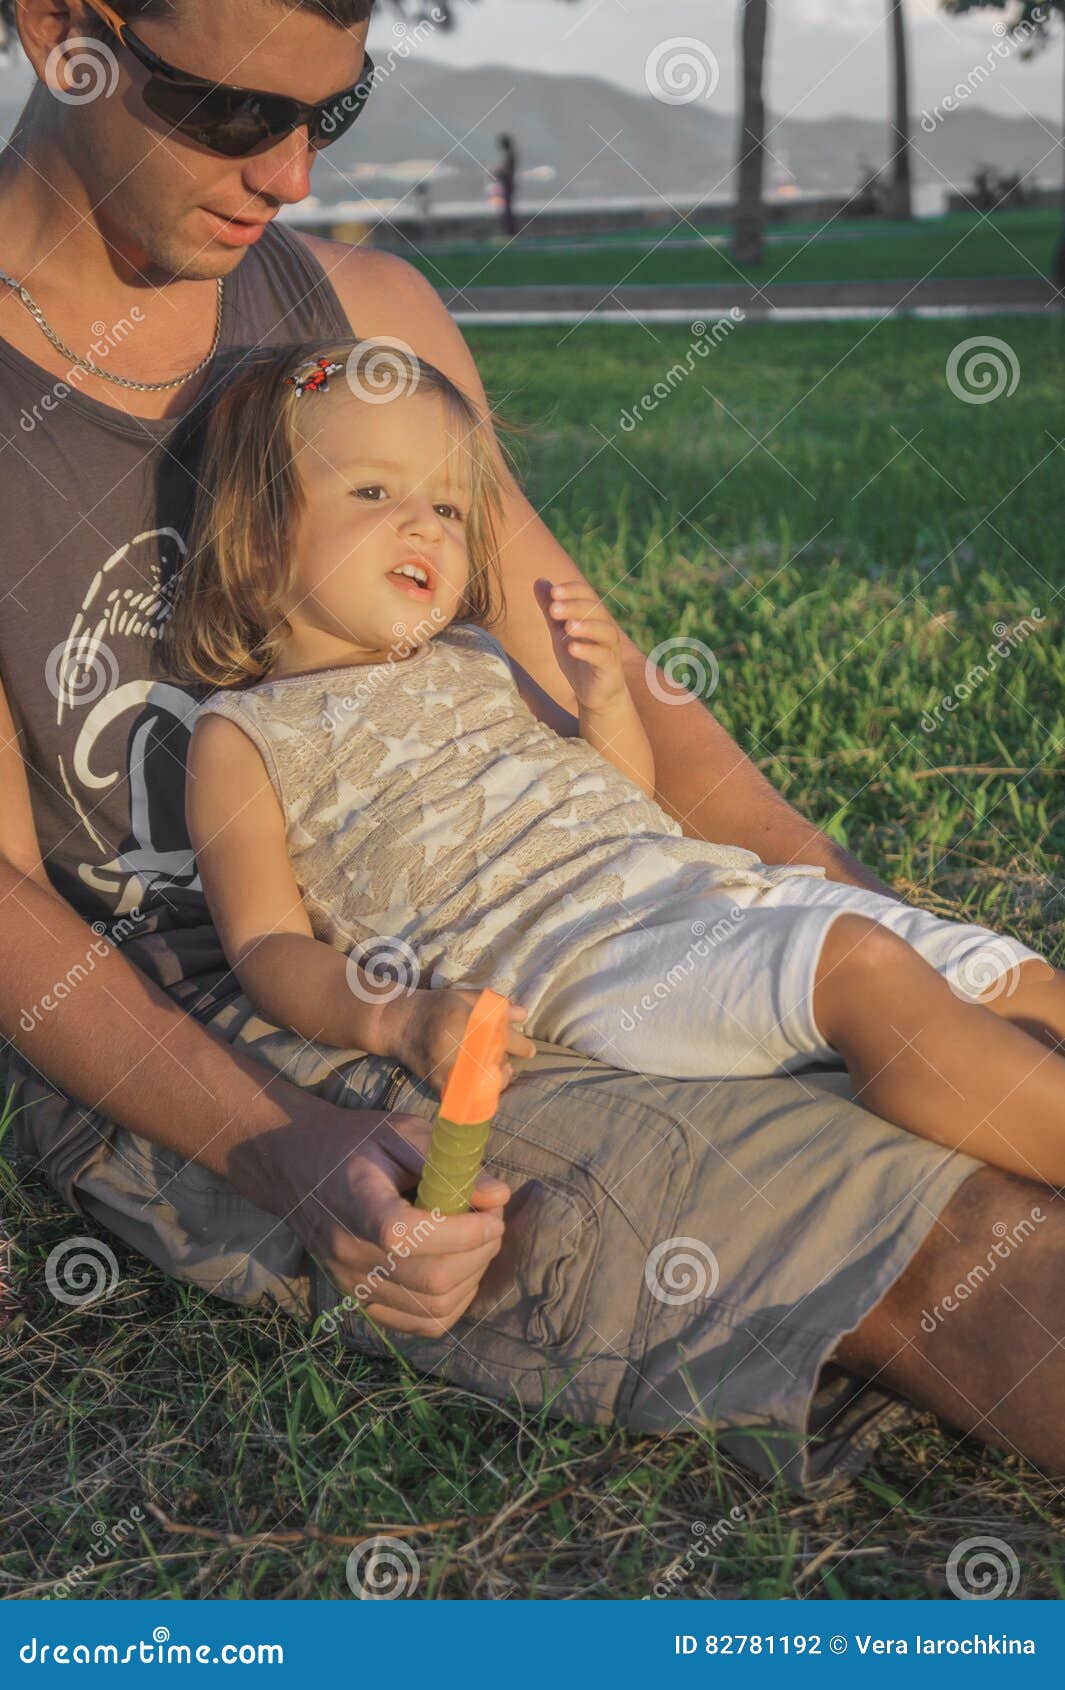 Daughter Sitting on the Lap of Dads Stock Ph photo image